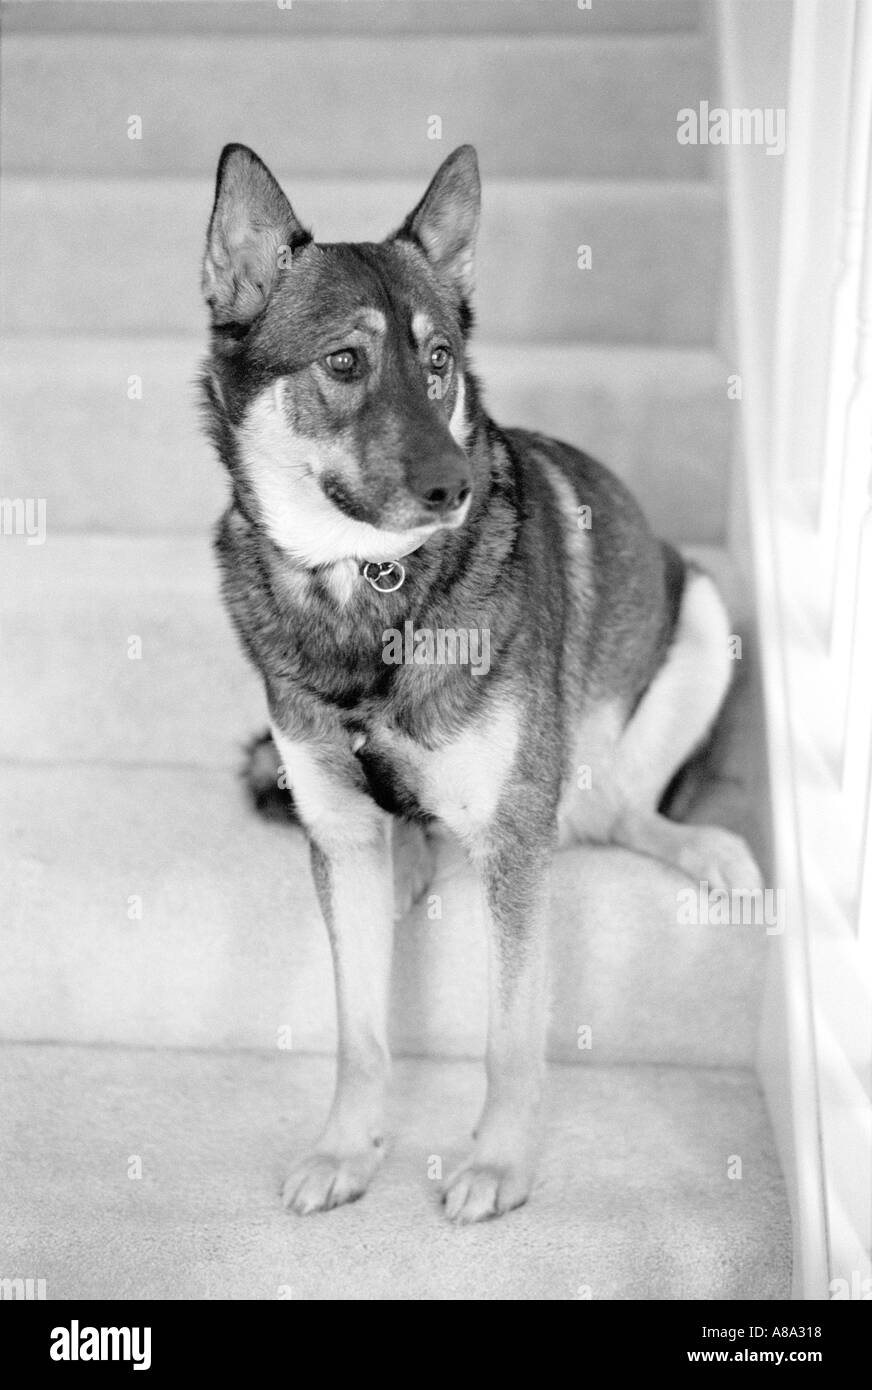 German Shepherd and Elkhound mixed breed dog sitting on stairs Stock Photo